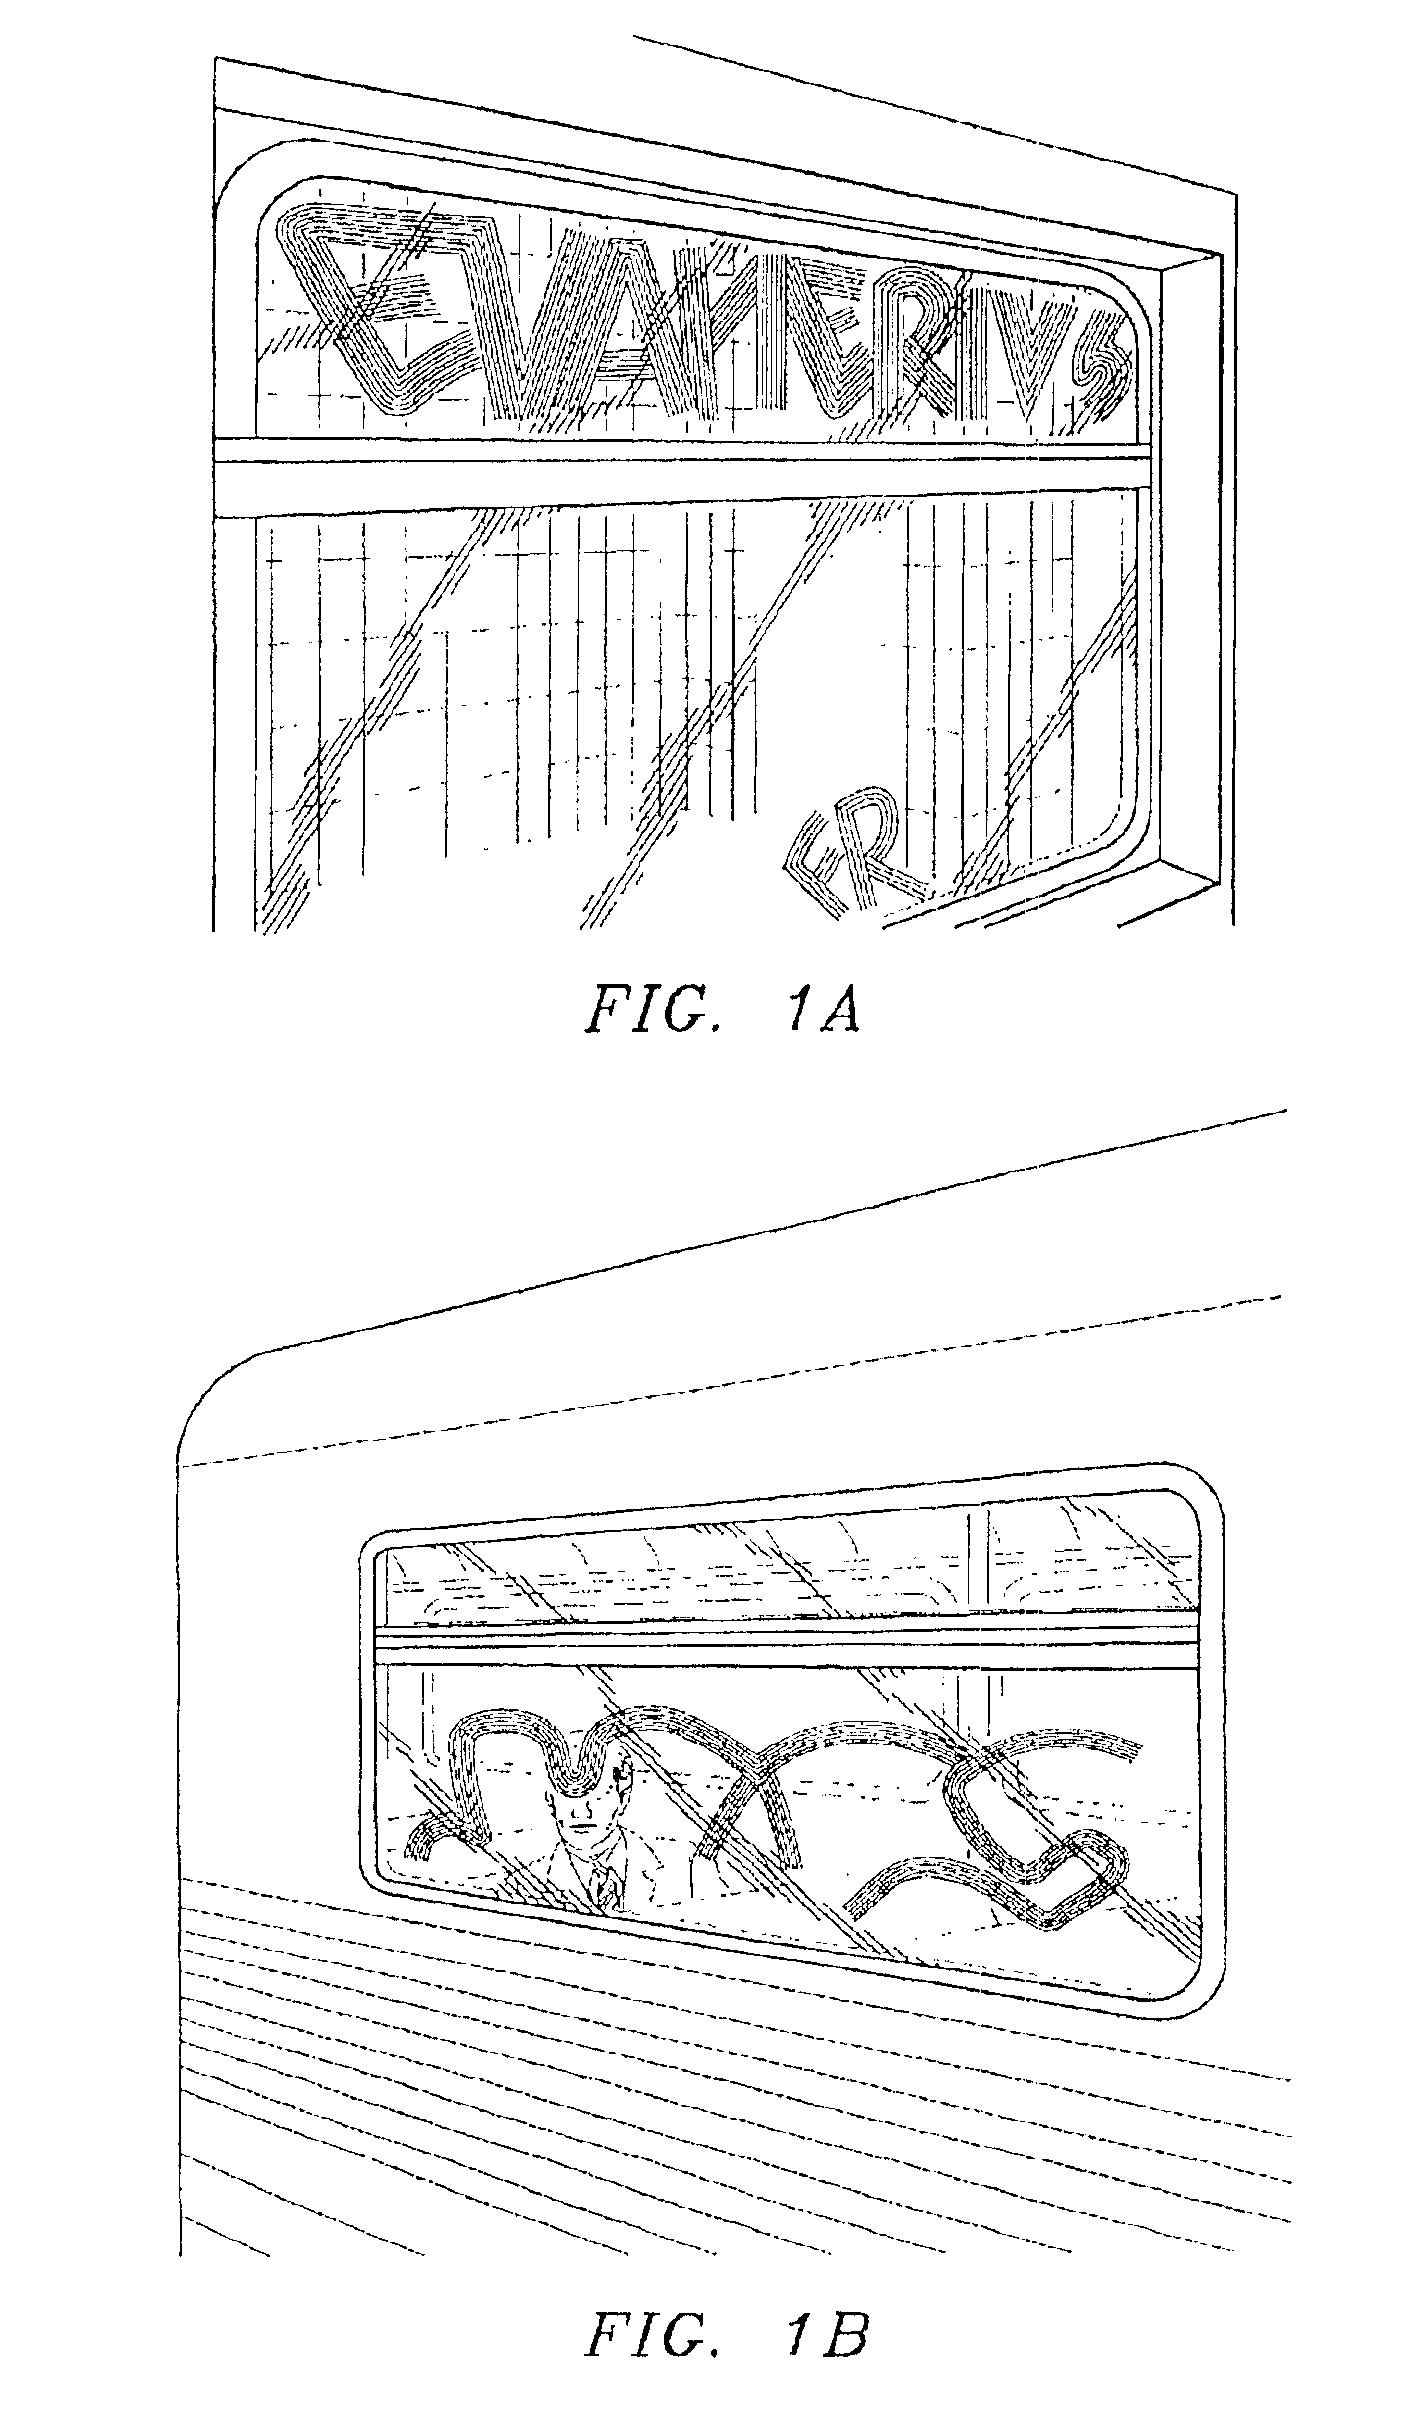 Method for controlled surface scratch removal and glass resurfacing